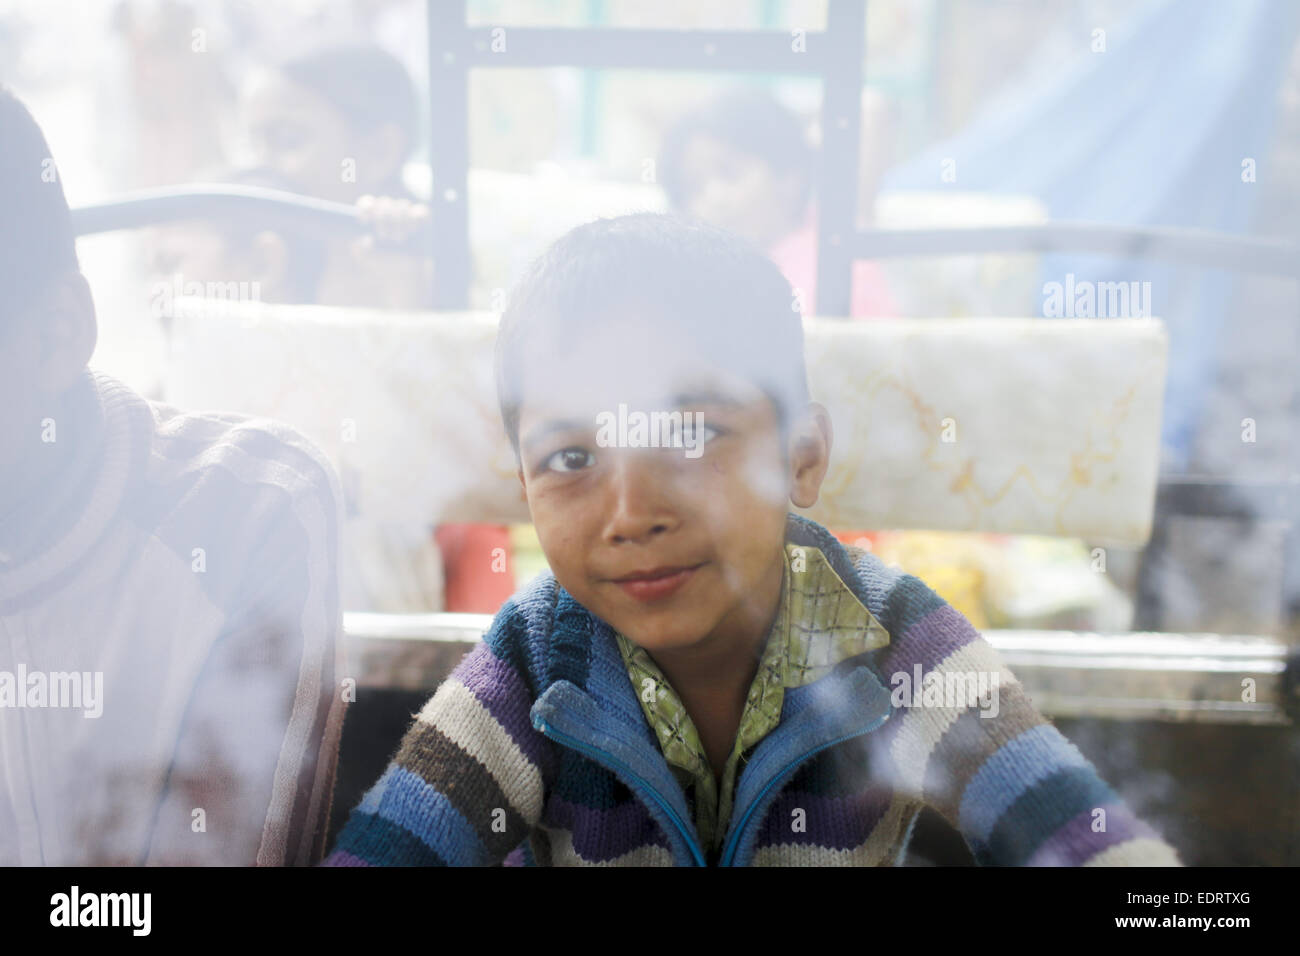 Tongi, Bangladesh. 09th Jan, 2015. th Jan, 2015. 09th Jan, 2014. Dhaka, Bangladesh ''“ A boy play in a broken taxi car in the road side of Bishaw Isema. Muslim devotees who participate at Biswa Istema, the second largest religious gathering of Muslims in the world, in Tongi 20 km from Dhaka city, Bangladesh. The three day long Biswa Istema starts on 09 January where 3 million people will participate from home and abroad. © K M Asad/ZUMA Wire/ZUMAPRESS.com/Alamy Live News Credit:  ZUMA Press, Inc./Alamy Live News Stock Photo